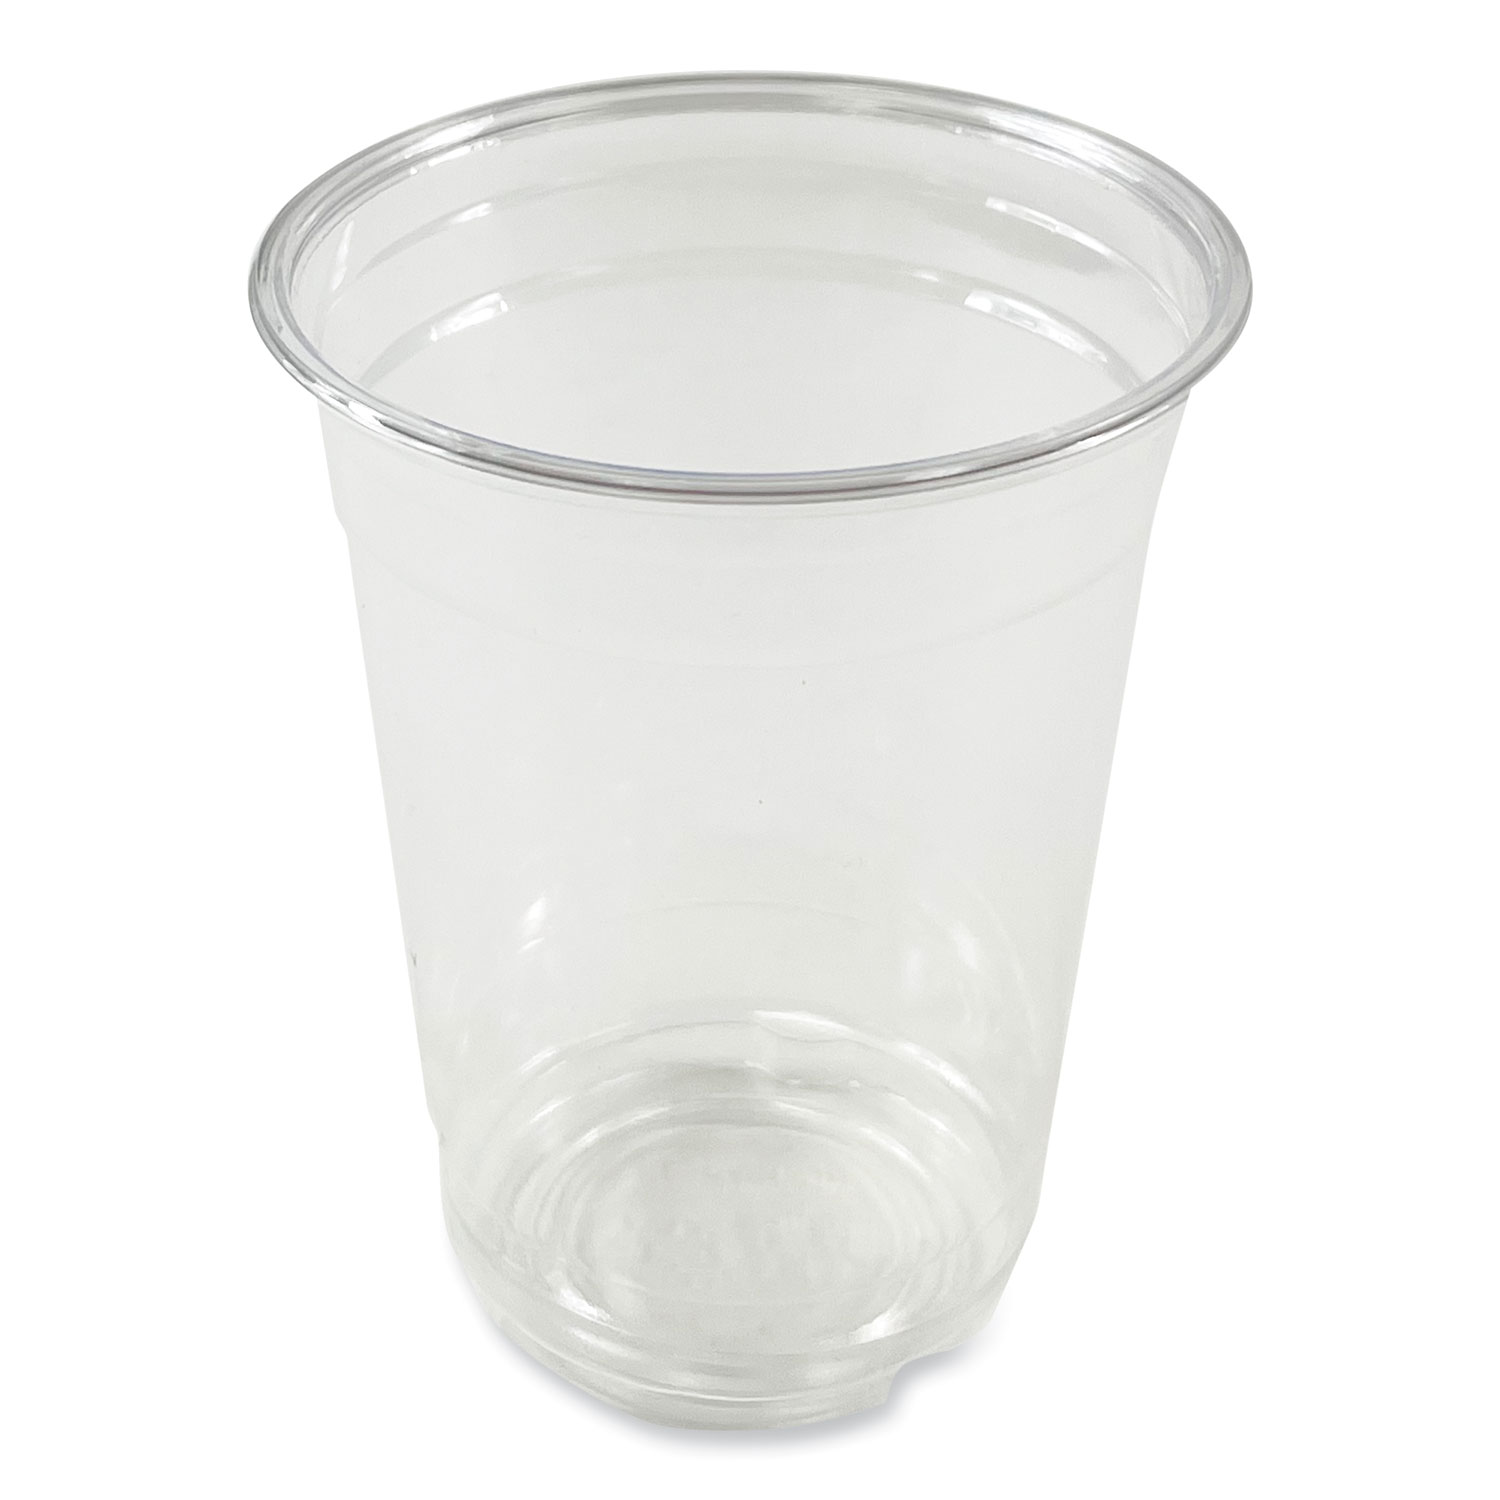 500 Count] 10 oz Clear Plastic Disposable PET Cups with Lids